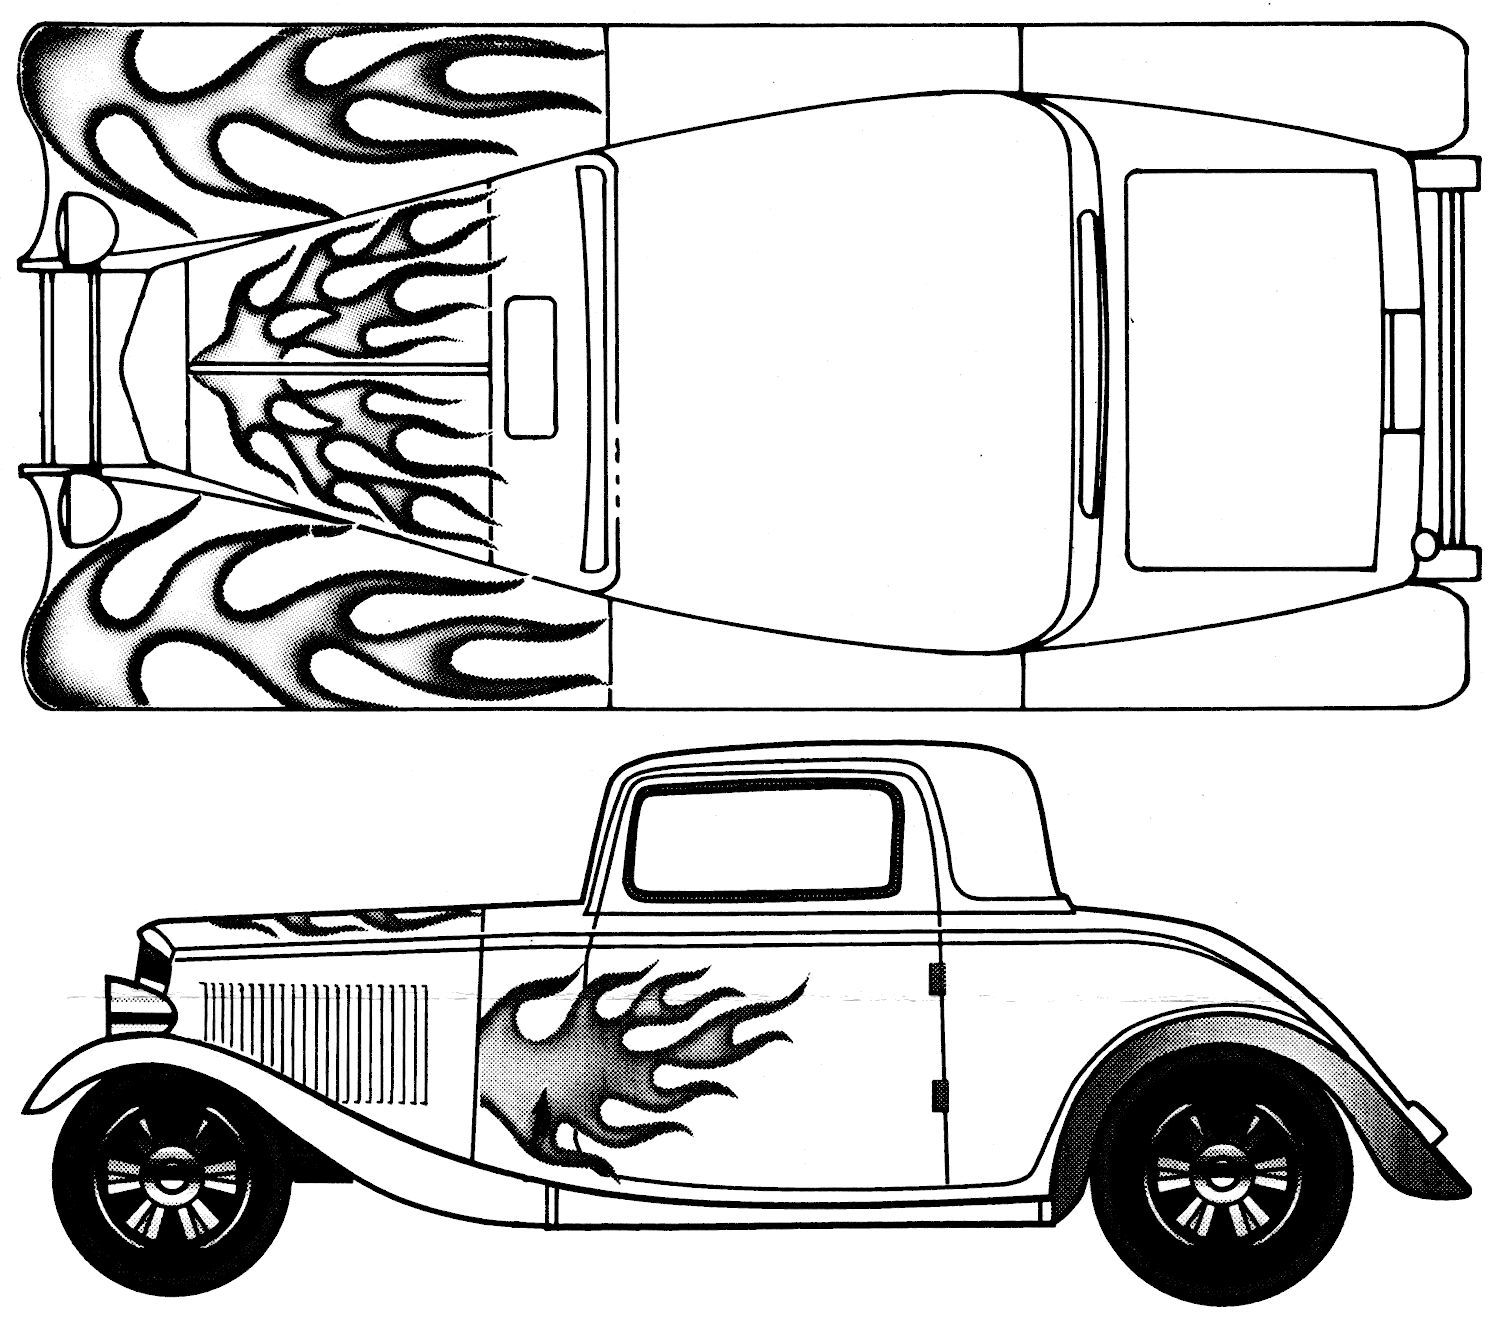 Bil Ford 32 3-window Coupe